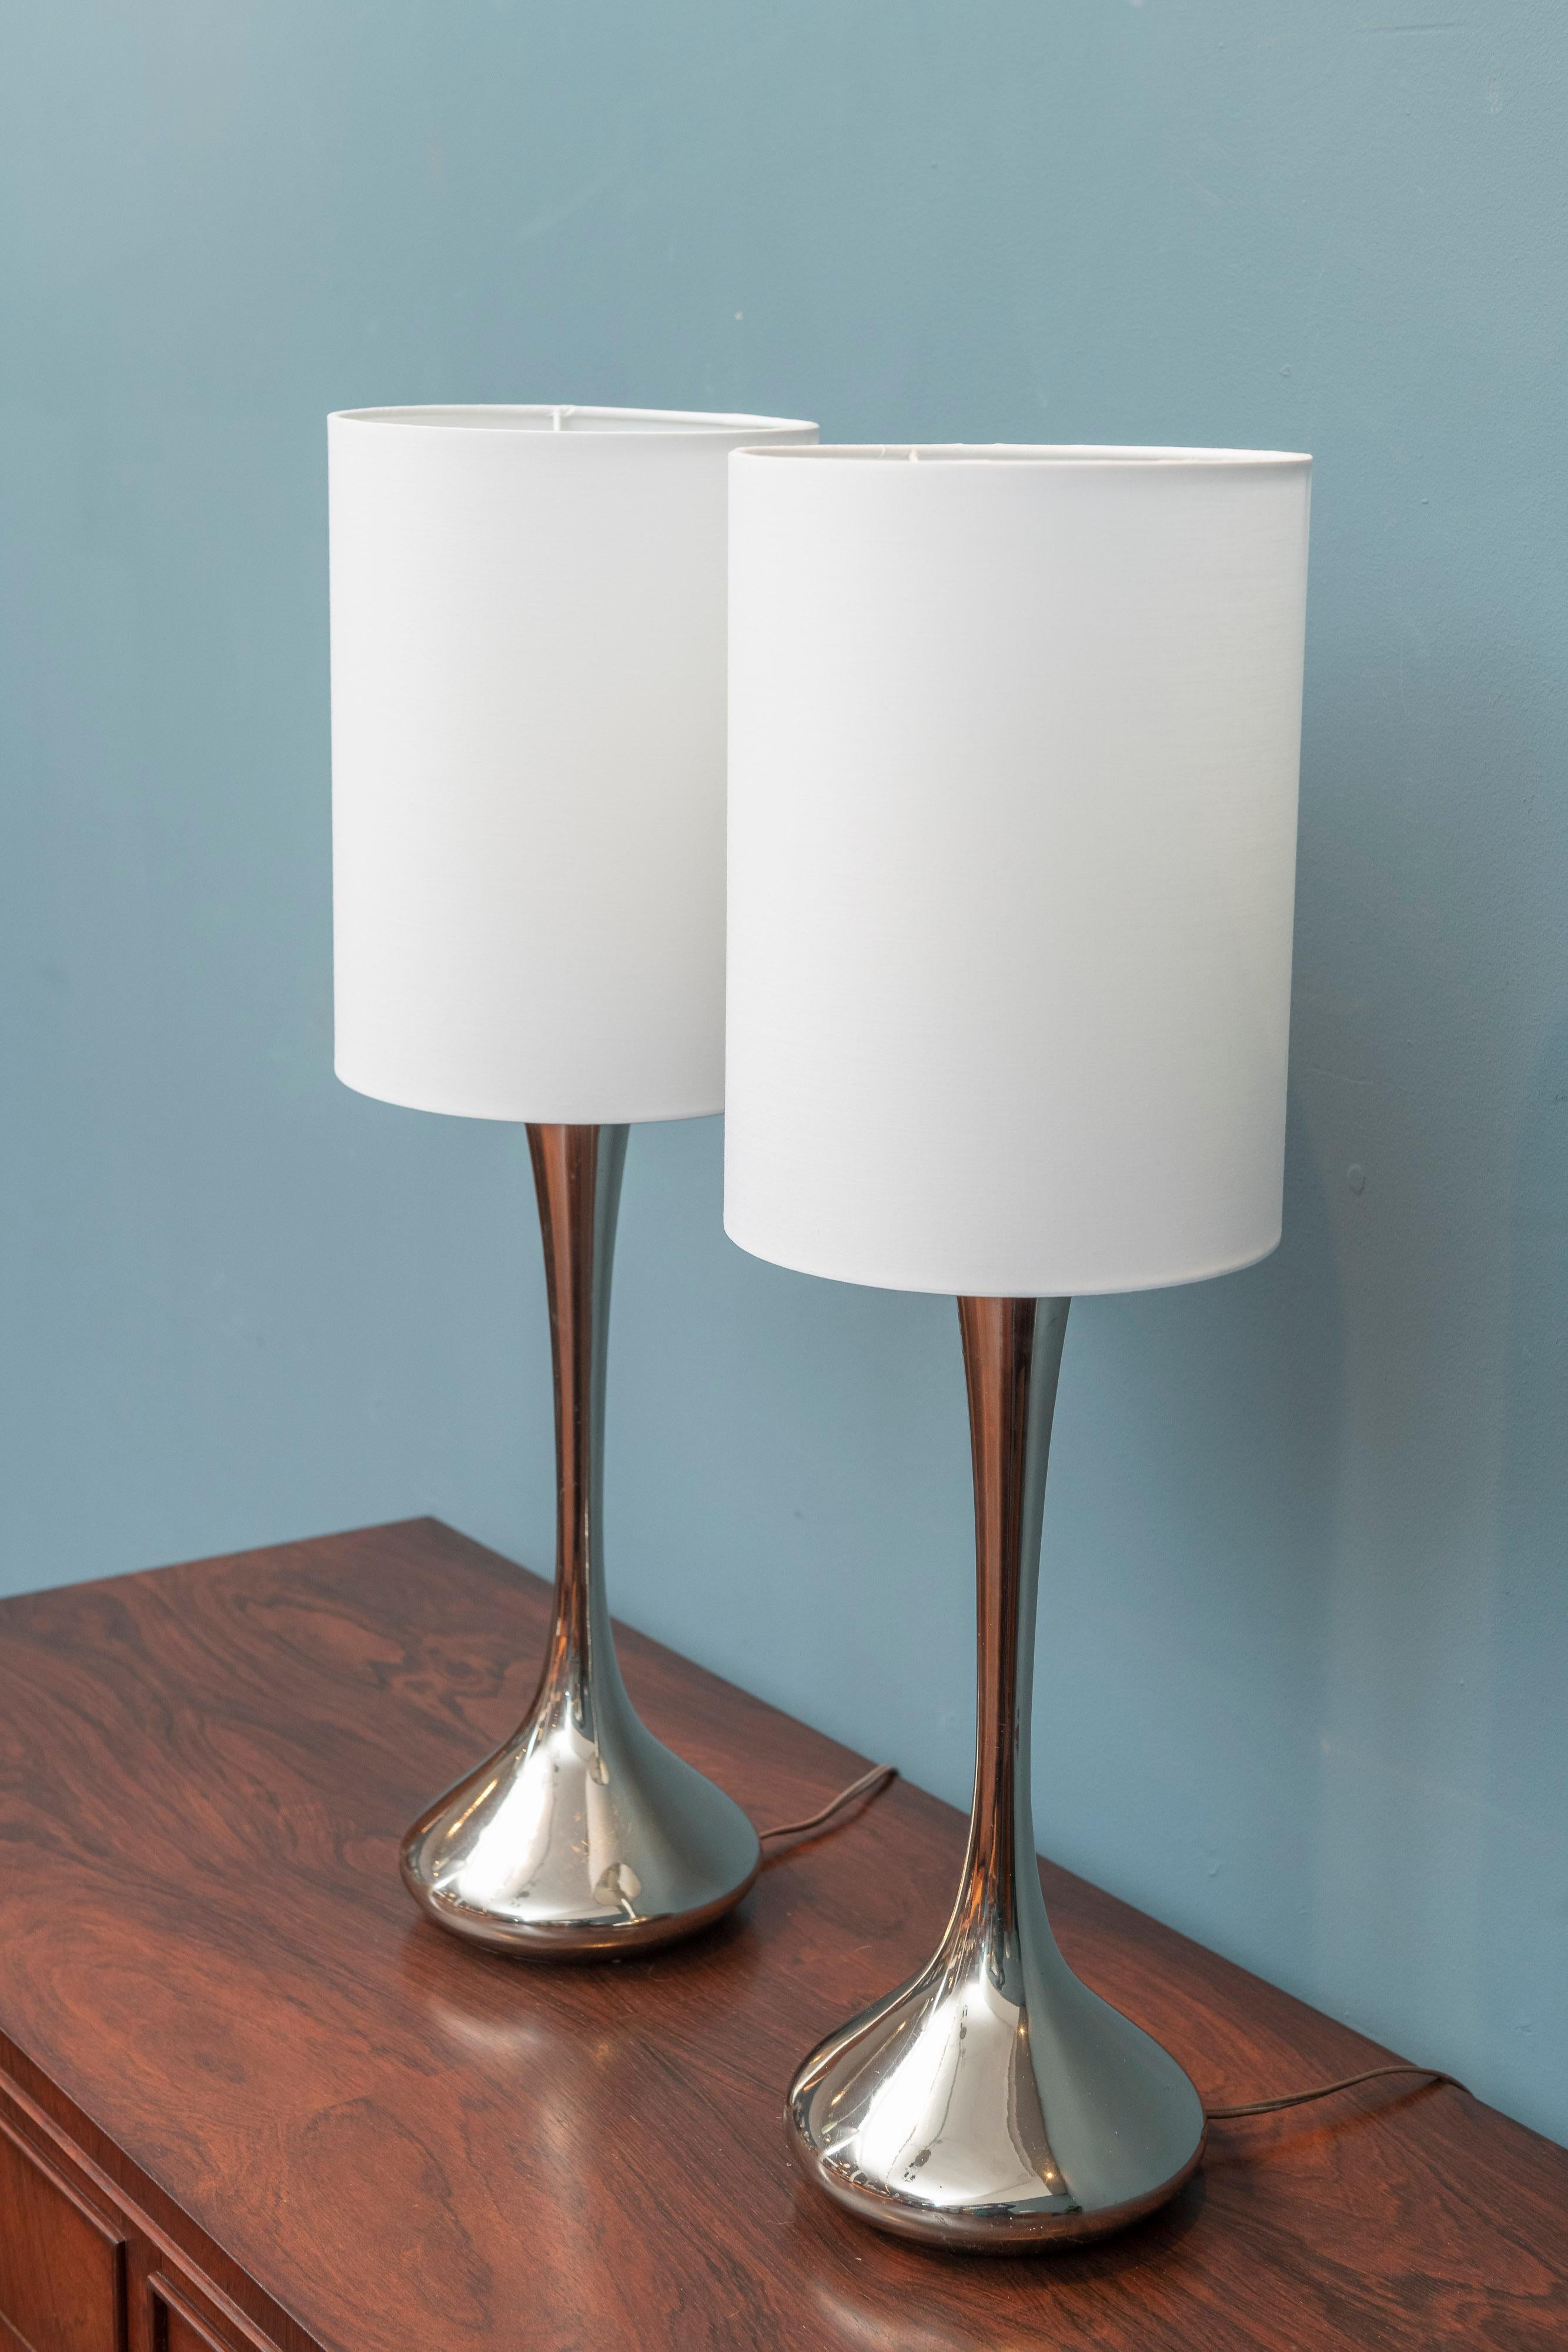 Pair of chrome table lamps by Laurel lamp company, shades not included.